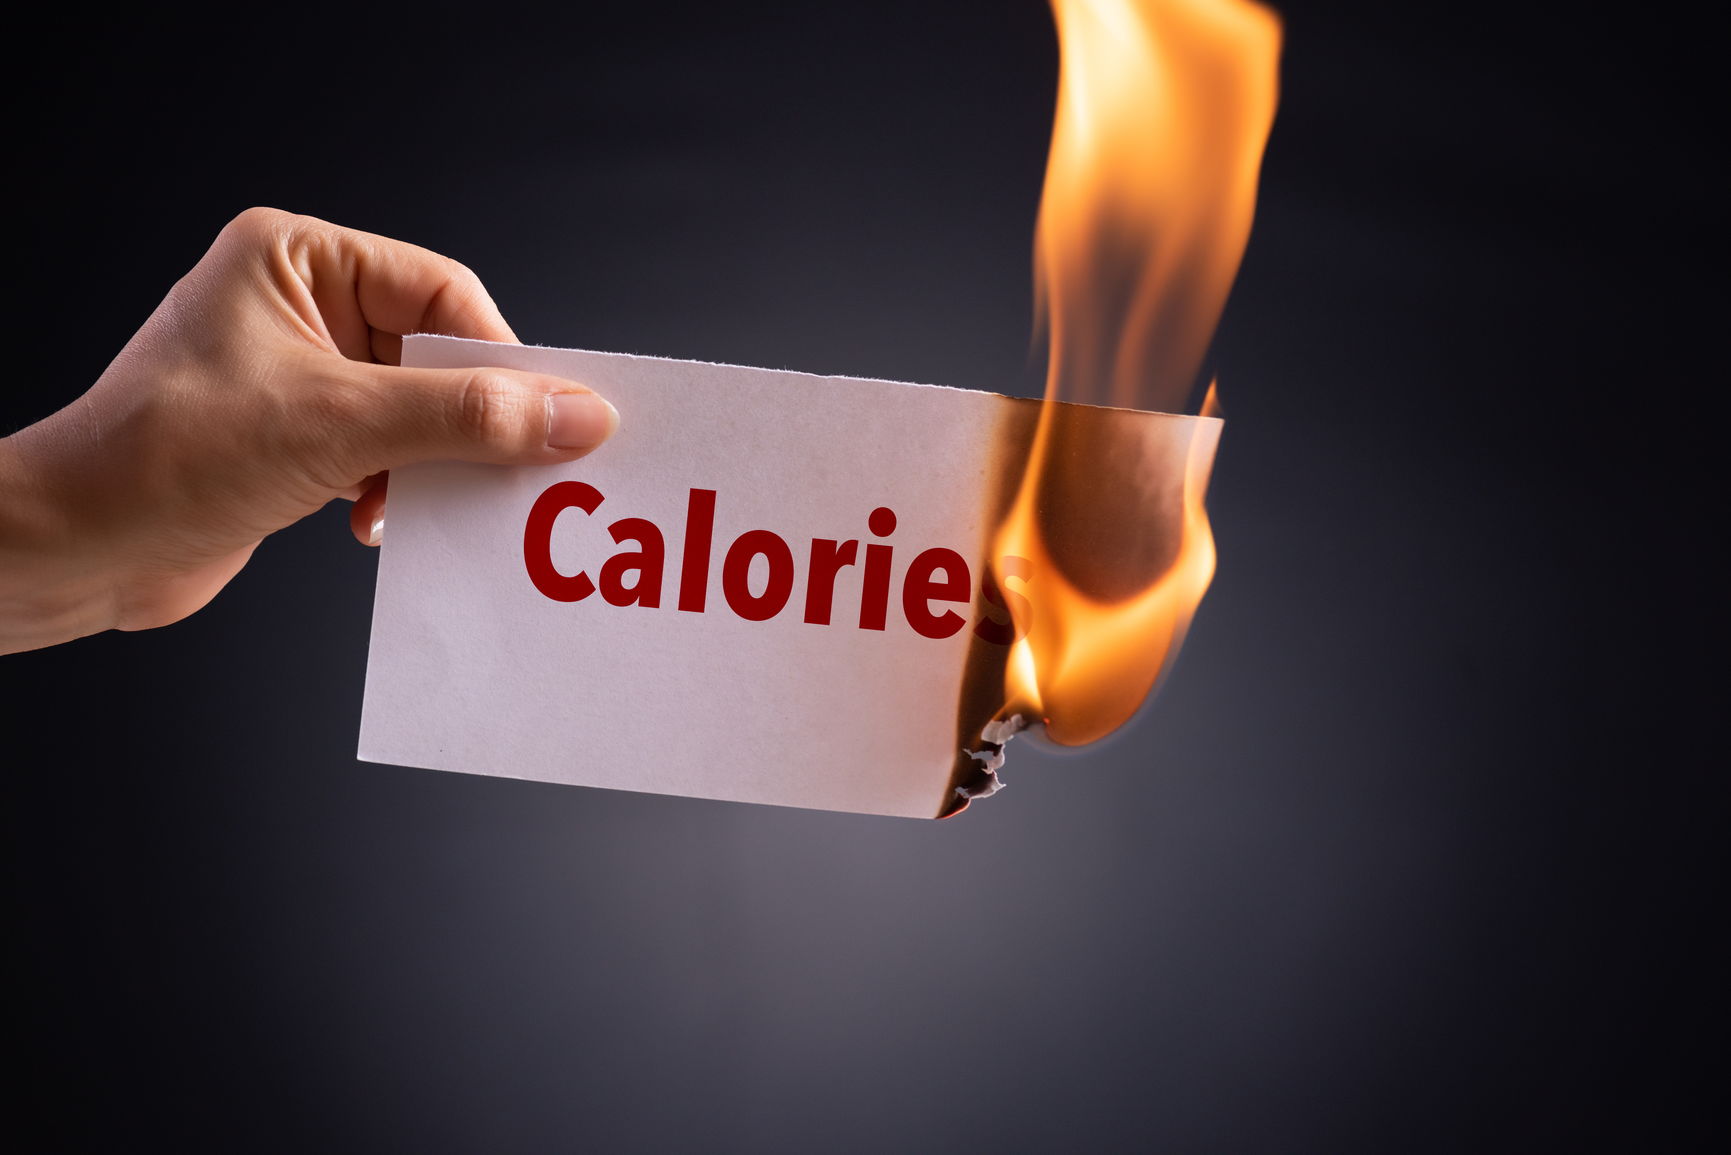 Exercise that burns many calories? 